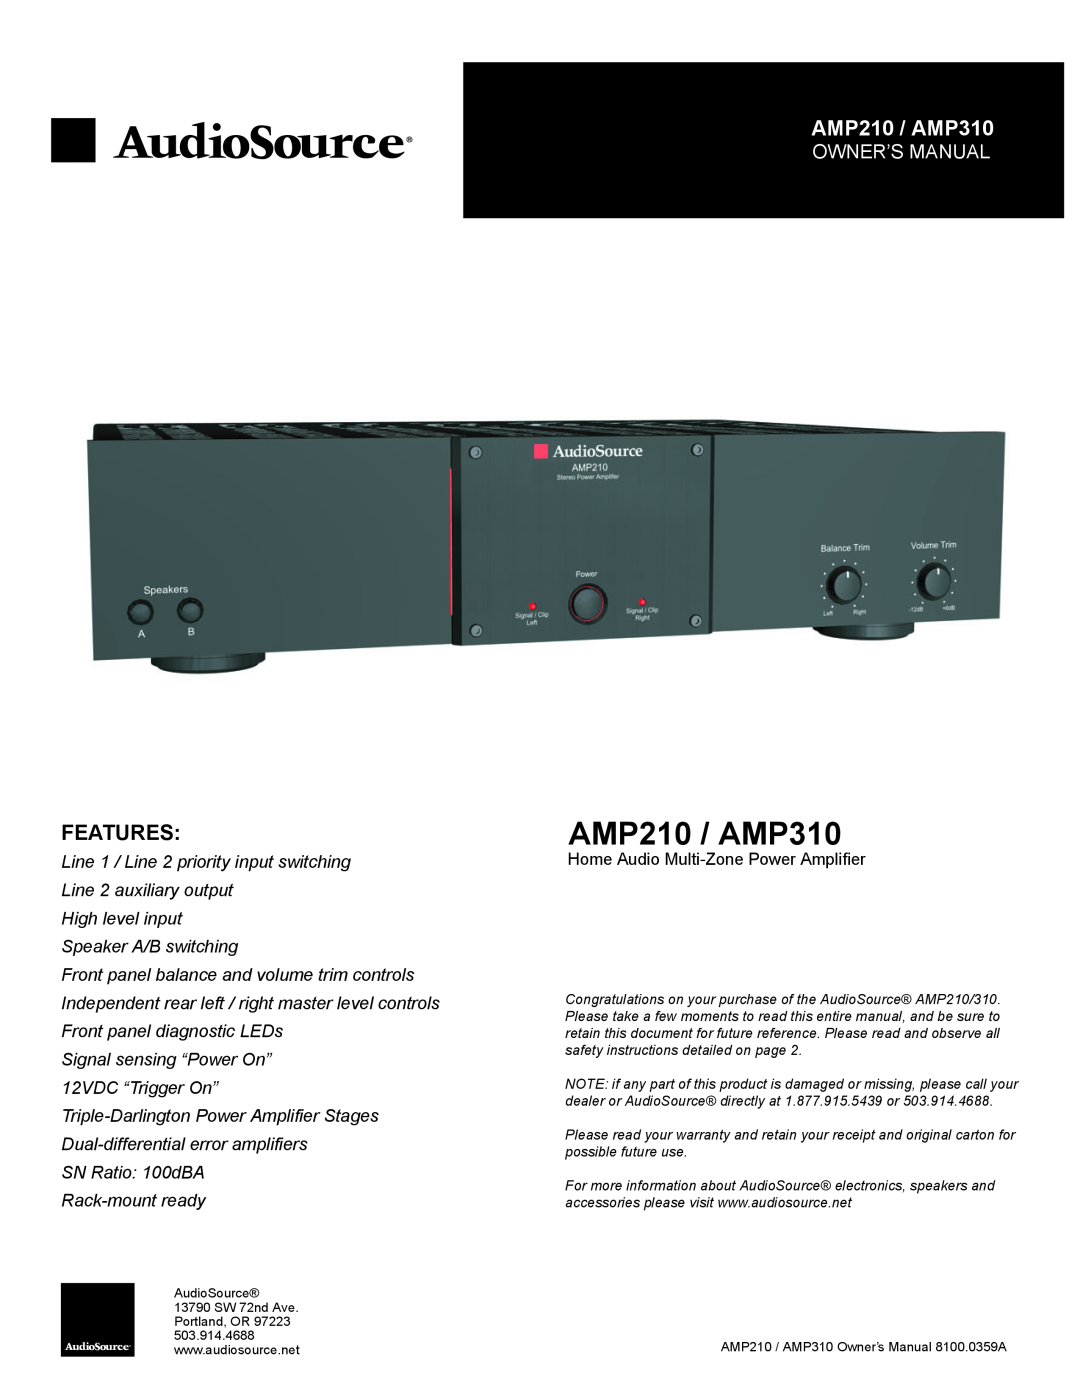 AudioSource owner manual AMP210 / AMP310, Features 